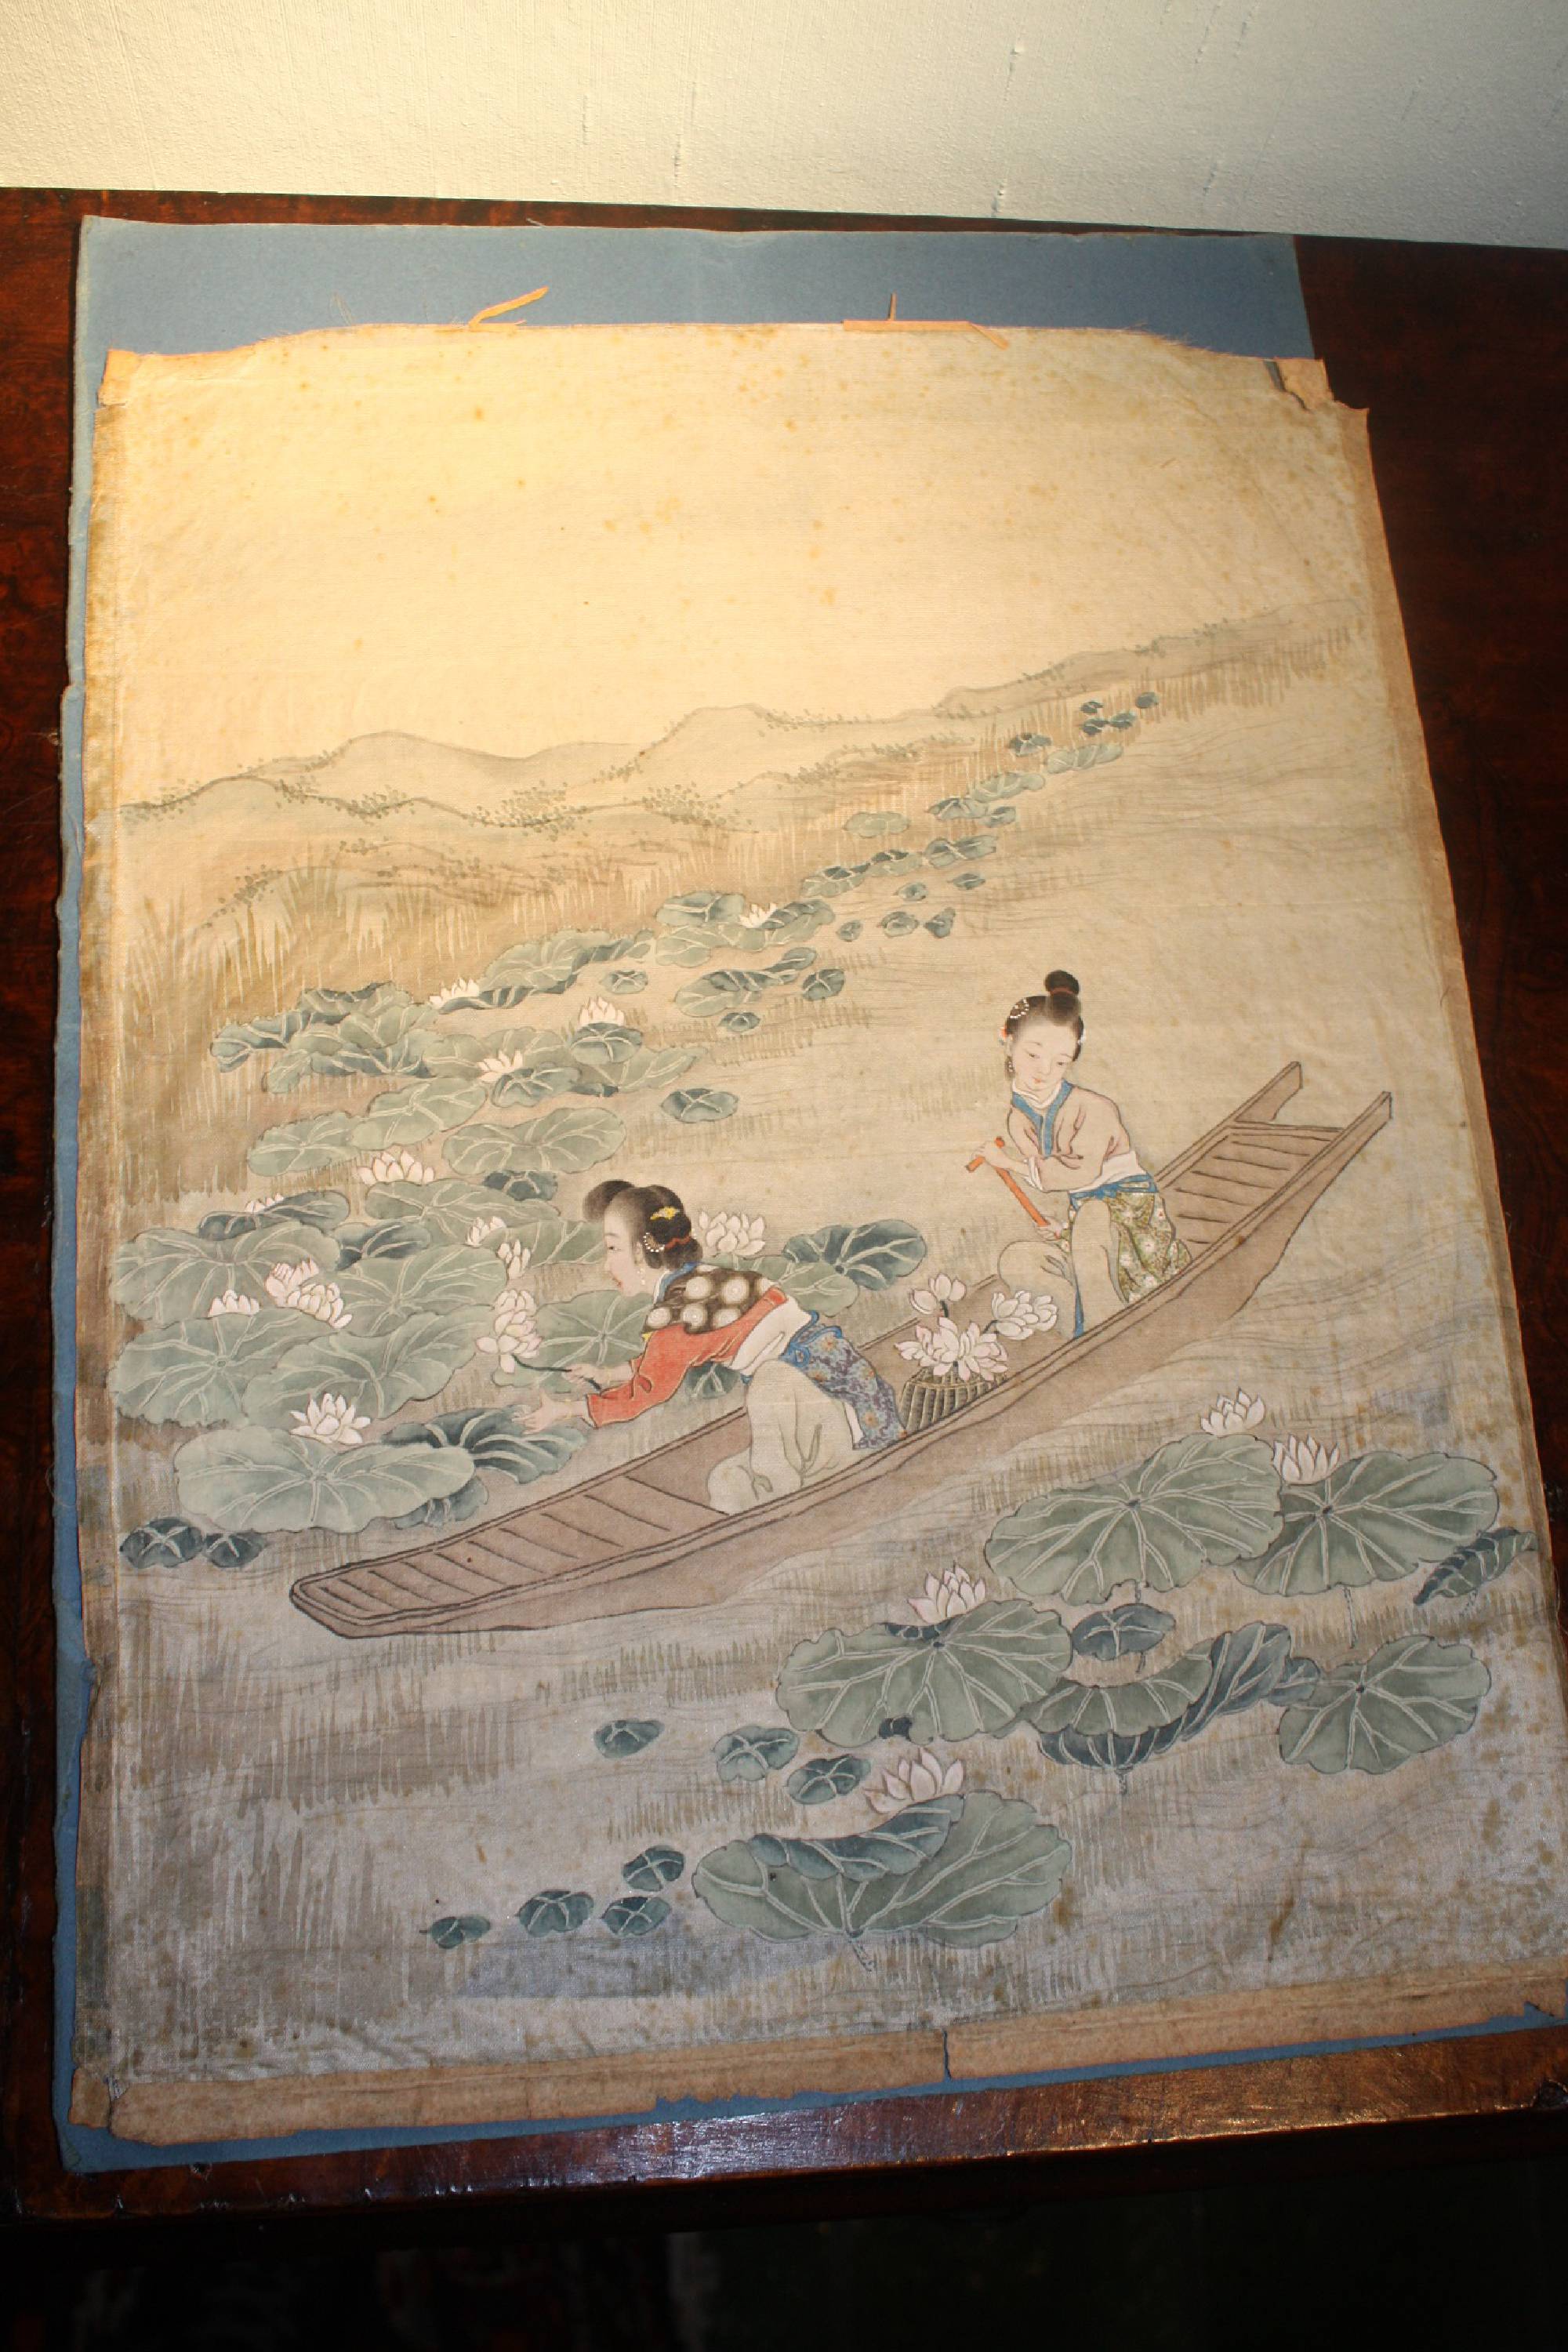 Antique 19th century Asian Japanese silk painting showing two women on a boat collecting lotus flowers